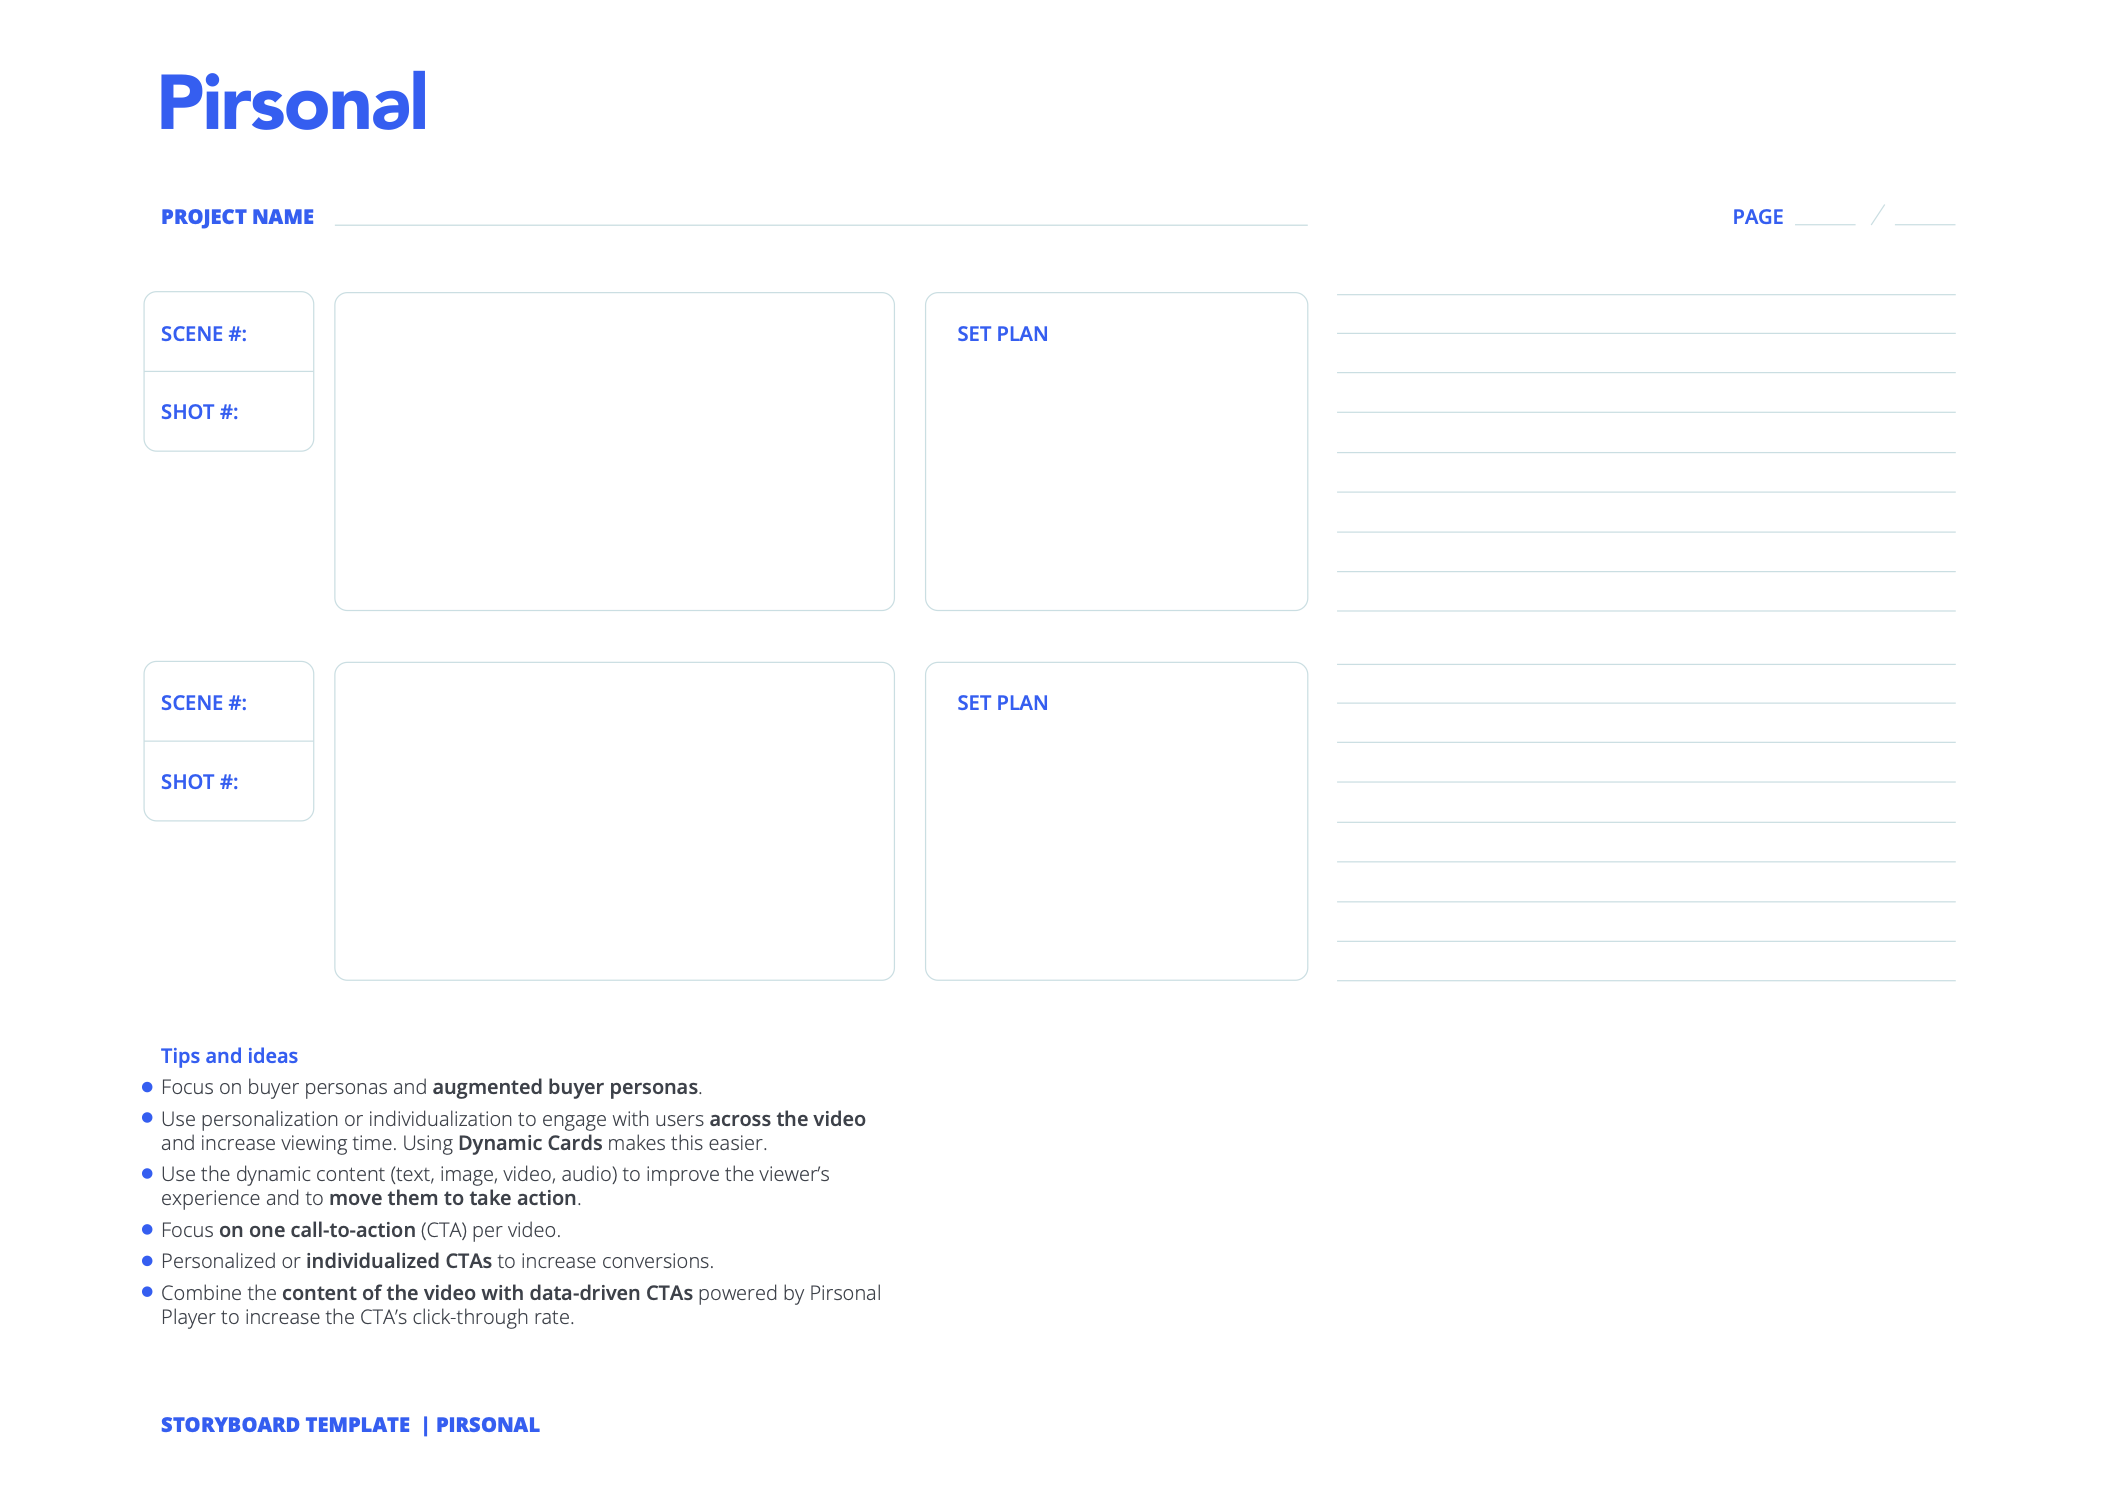 Storyboard Template for Personalized Videos